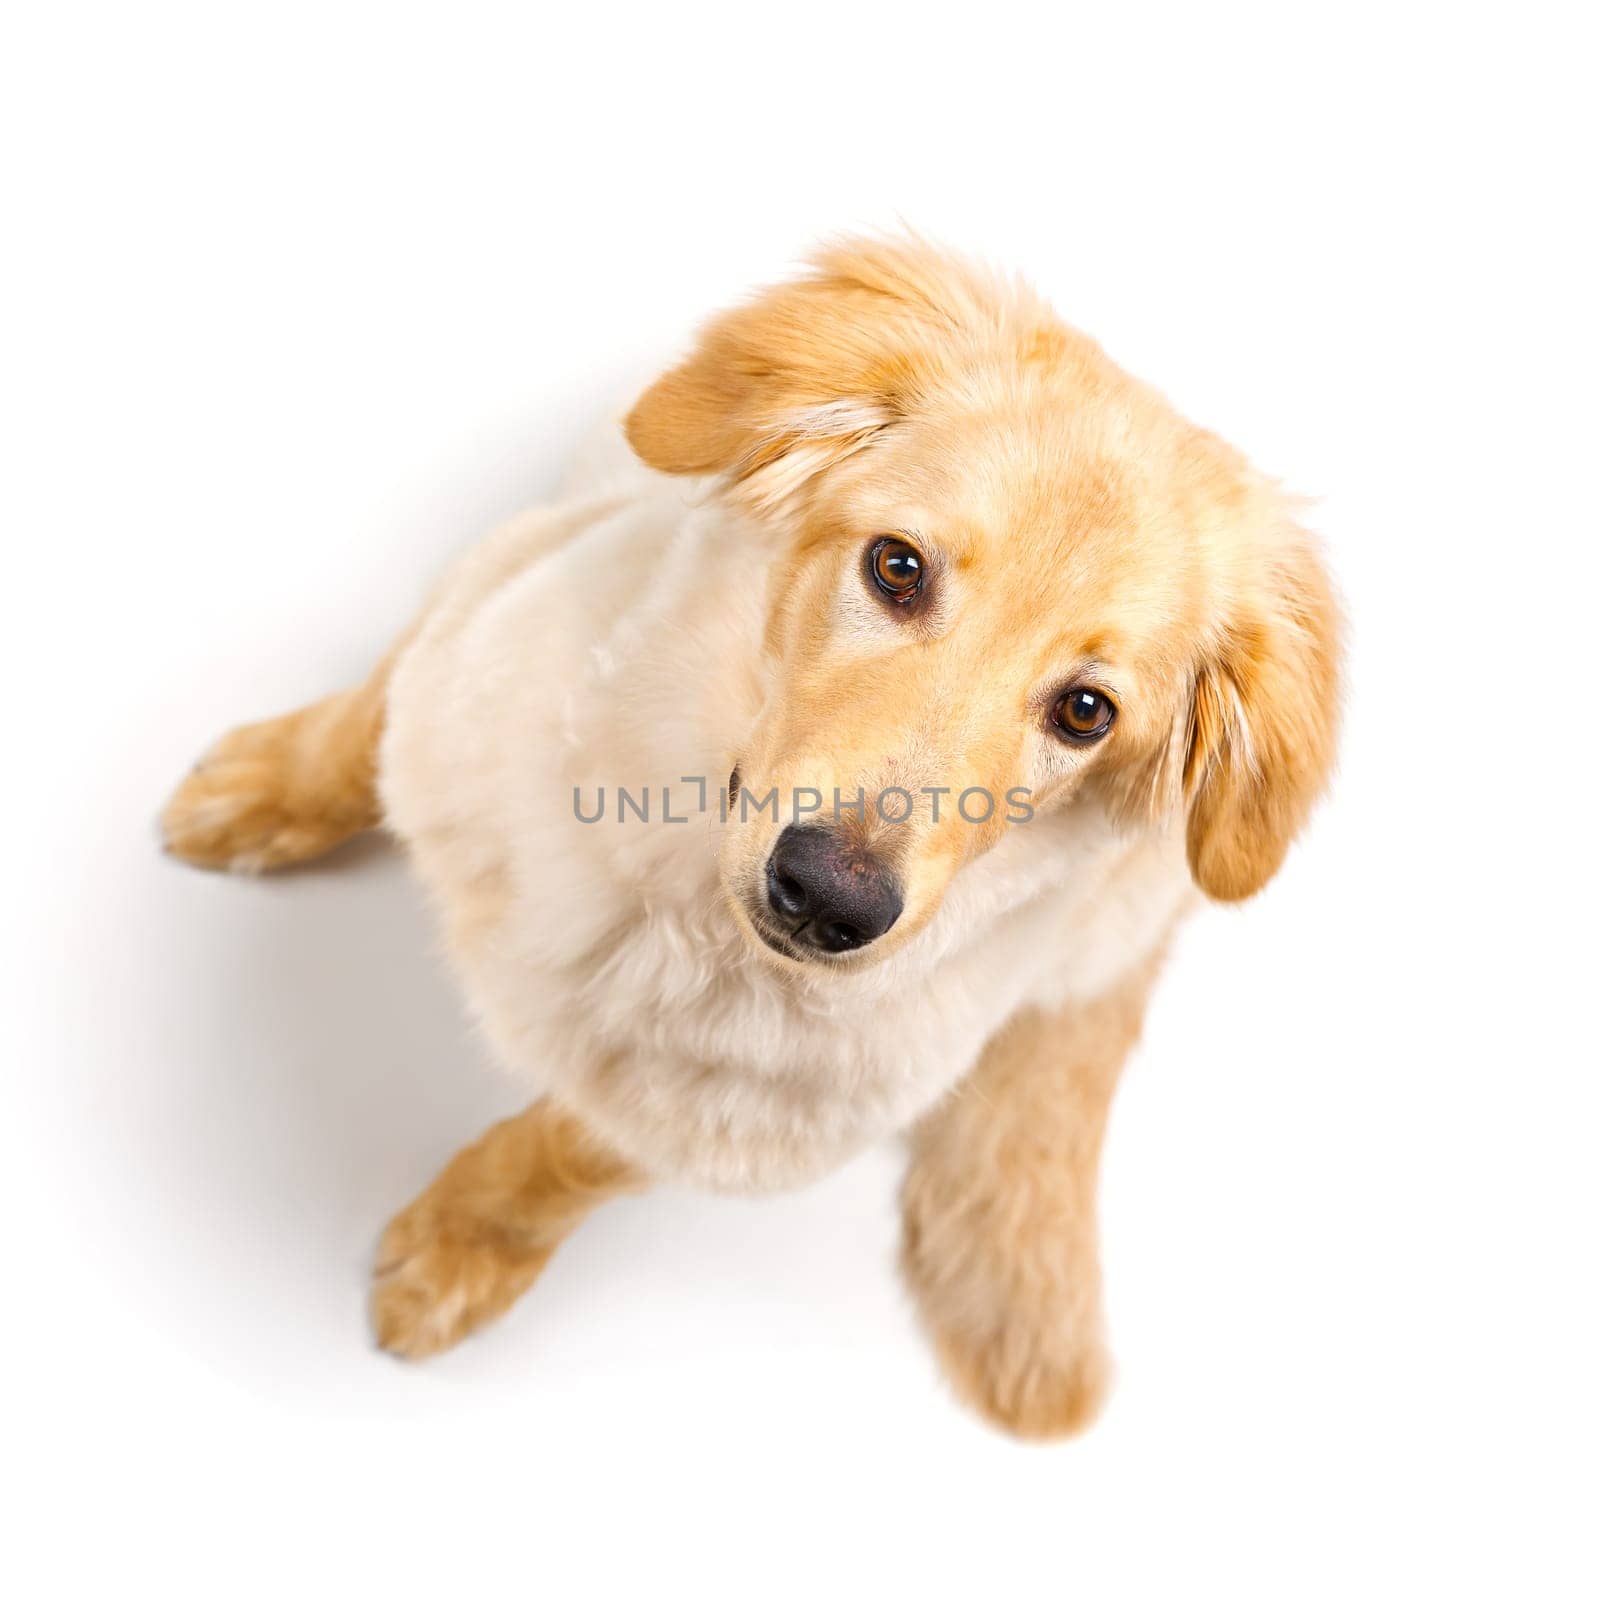 Isolated blond hovawart puppy. Studio shot of a cute Hovawart puppy. golden retriever puppy. 5 month old puppy